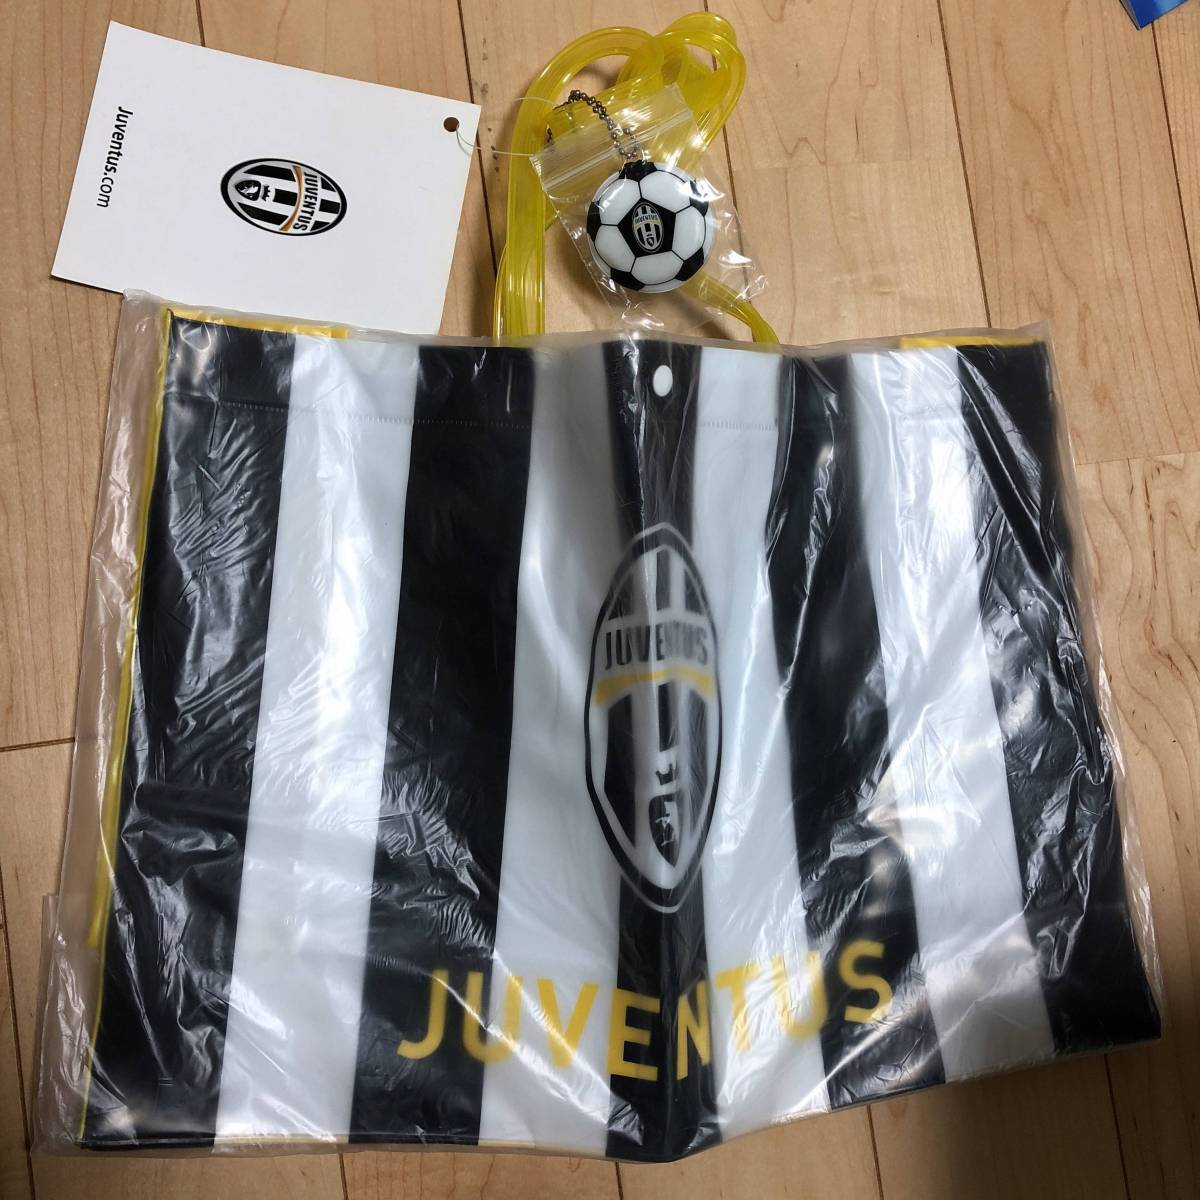  postage included new goods unopened yu vent s bag sea, pool, beach etc. soccer summer back 